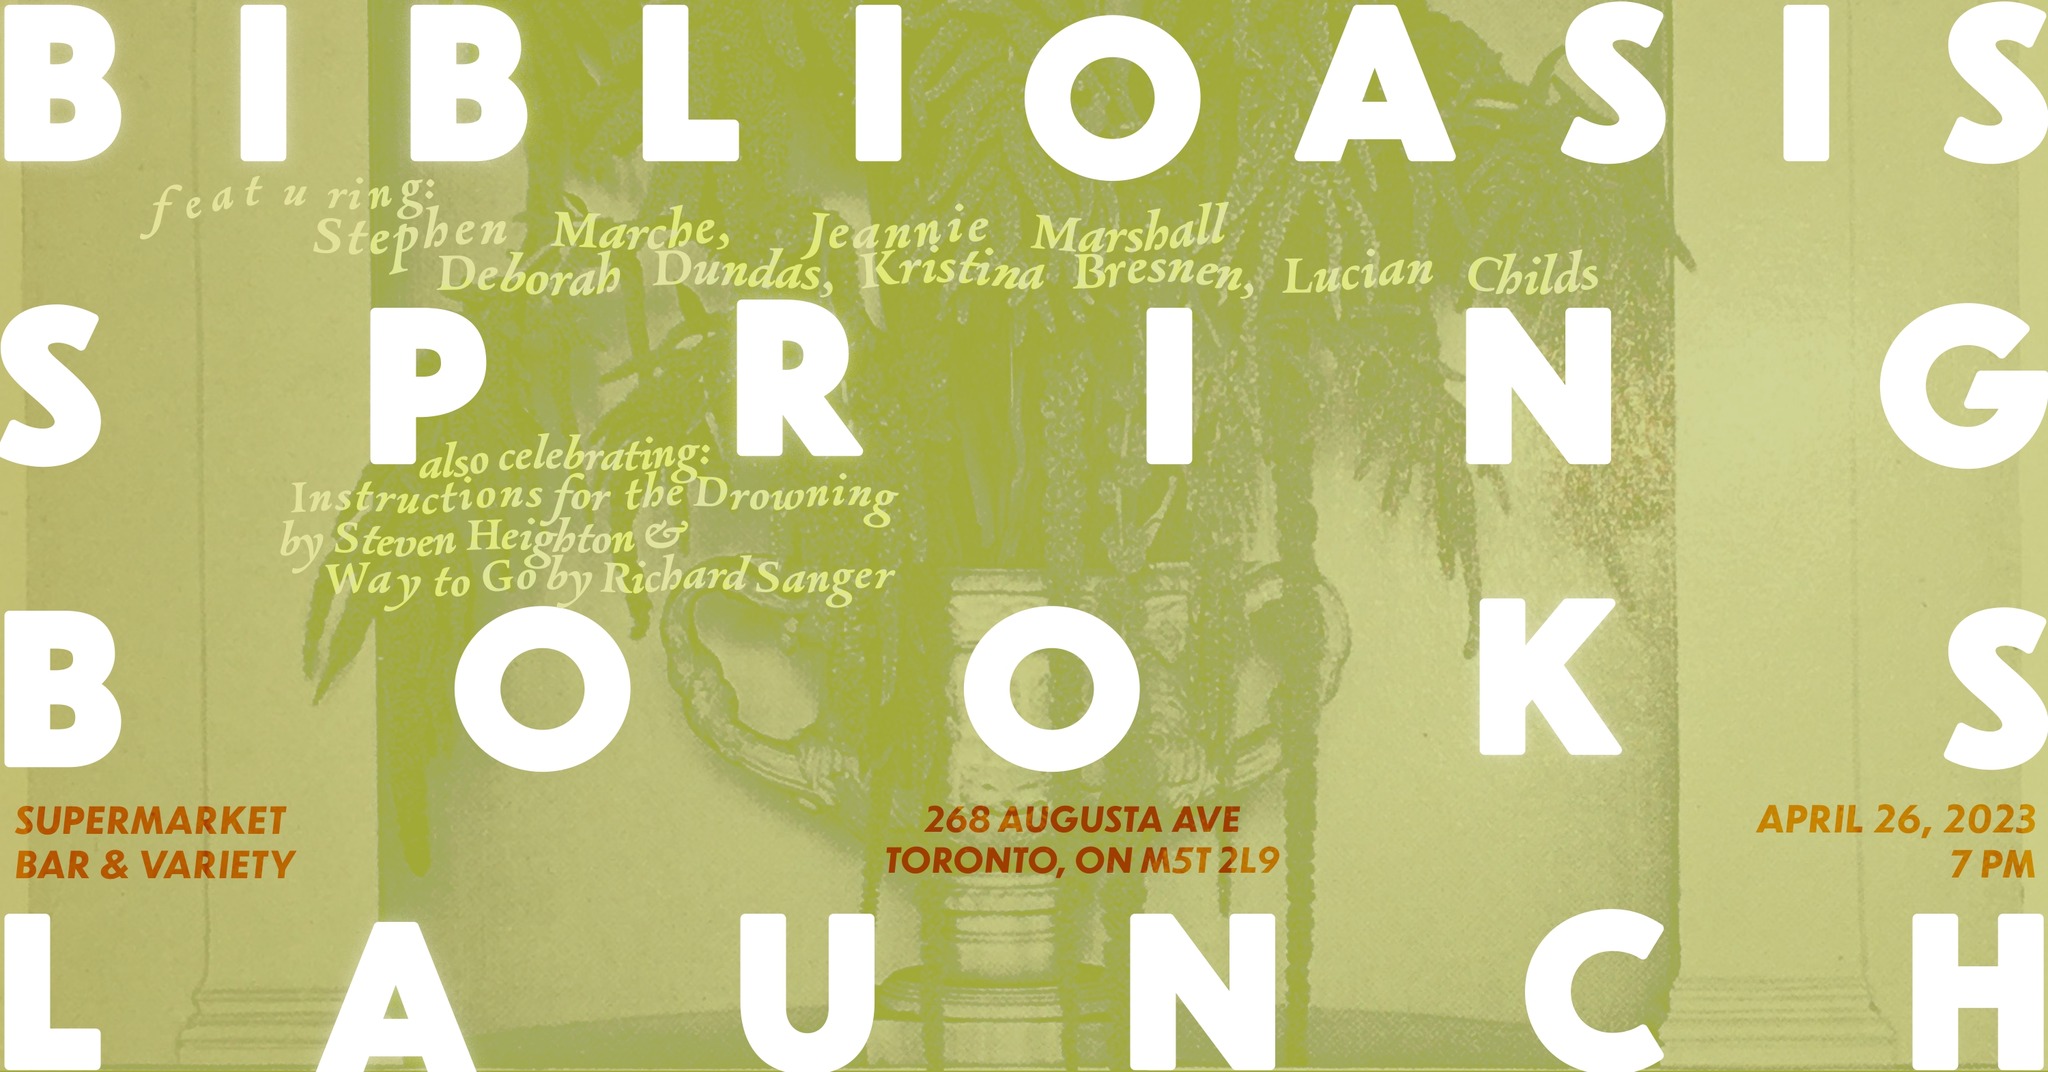 Biblioasis Spring Books Launch, WEDNESDAY, APRIL 26, 2023 AT 7 PM